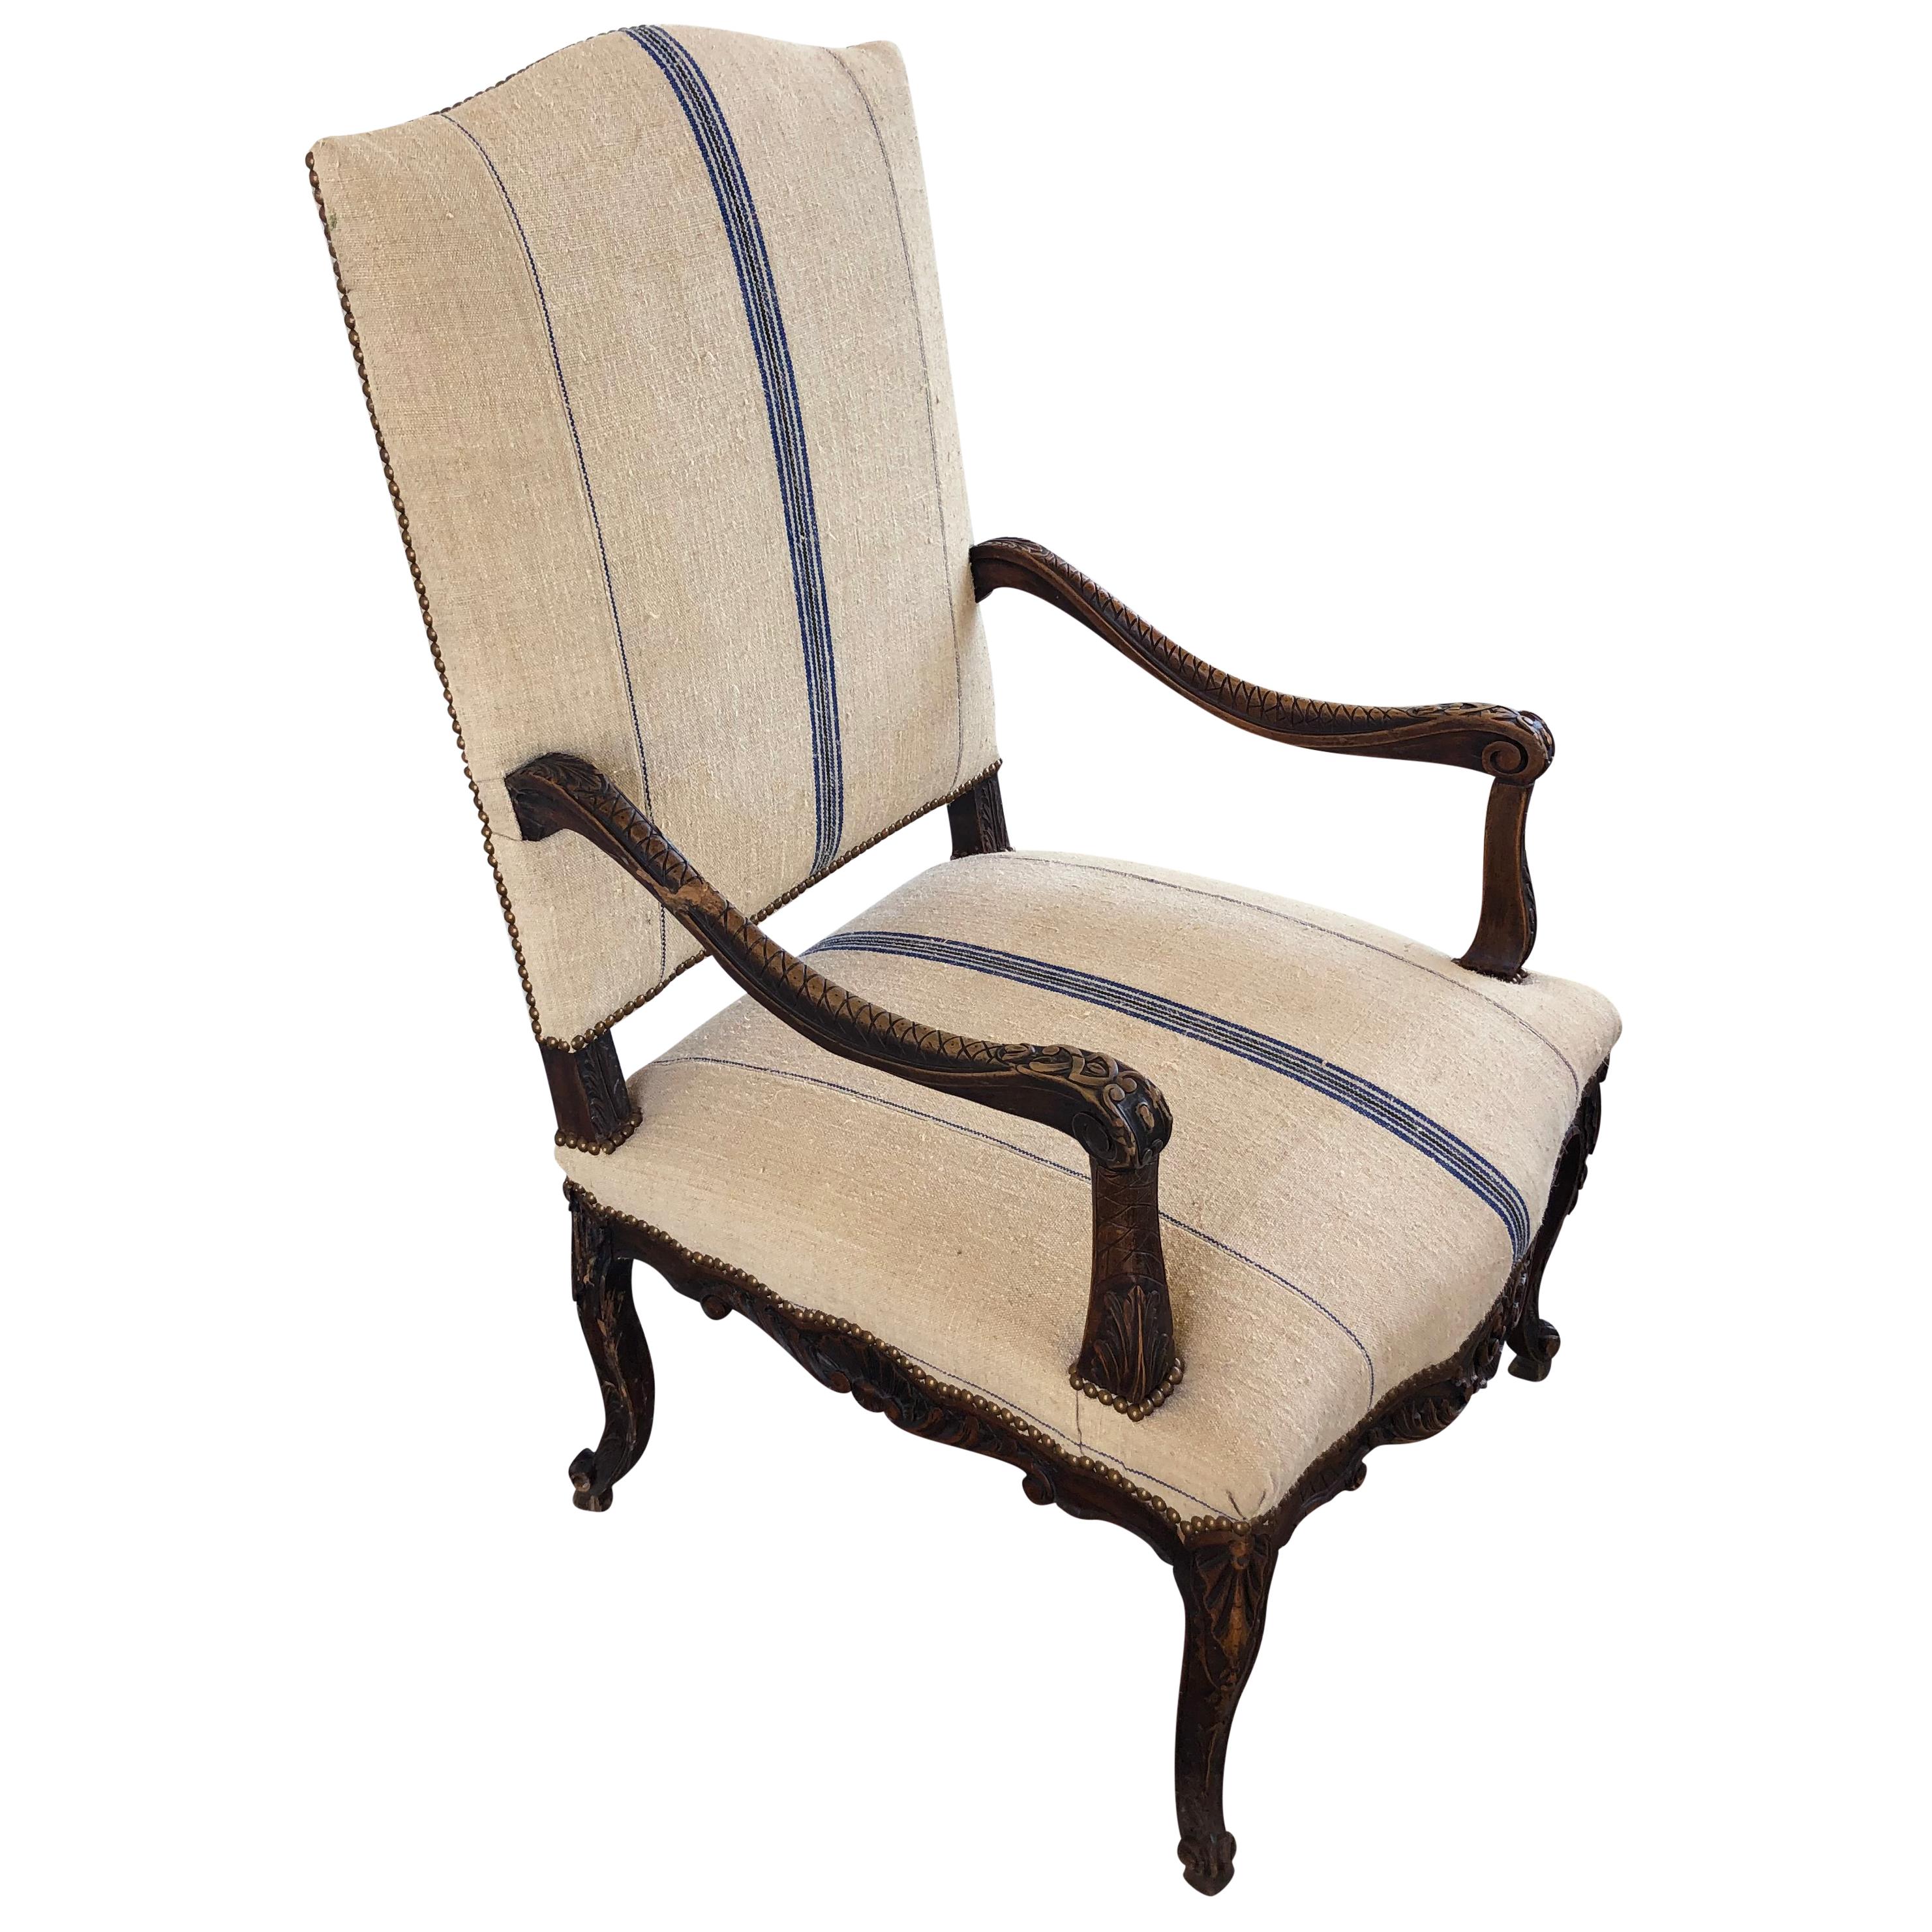 Hand-Carved 18th Century Régence Fauteuil, Antique French Beechwood, Brass Armchair